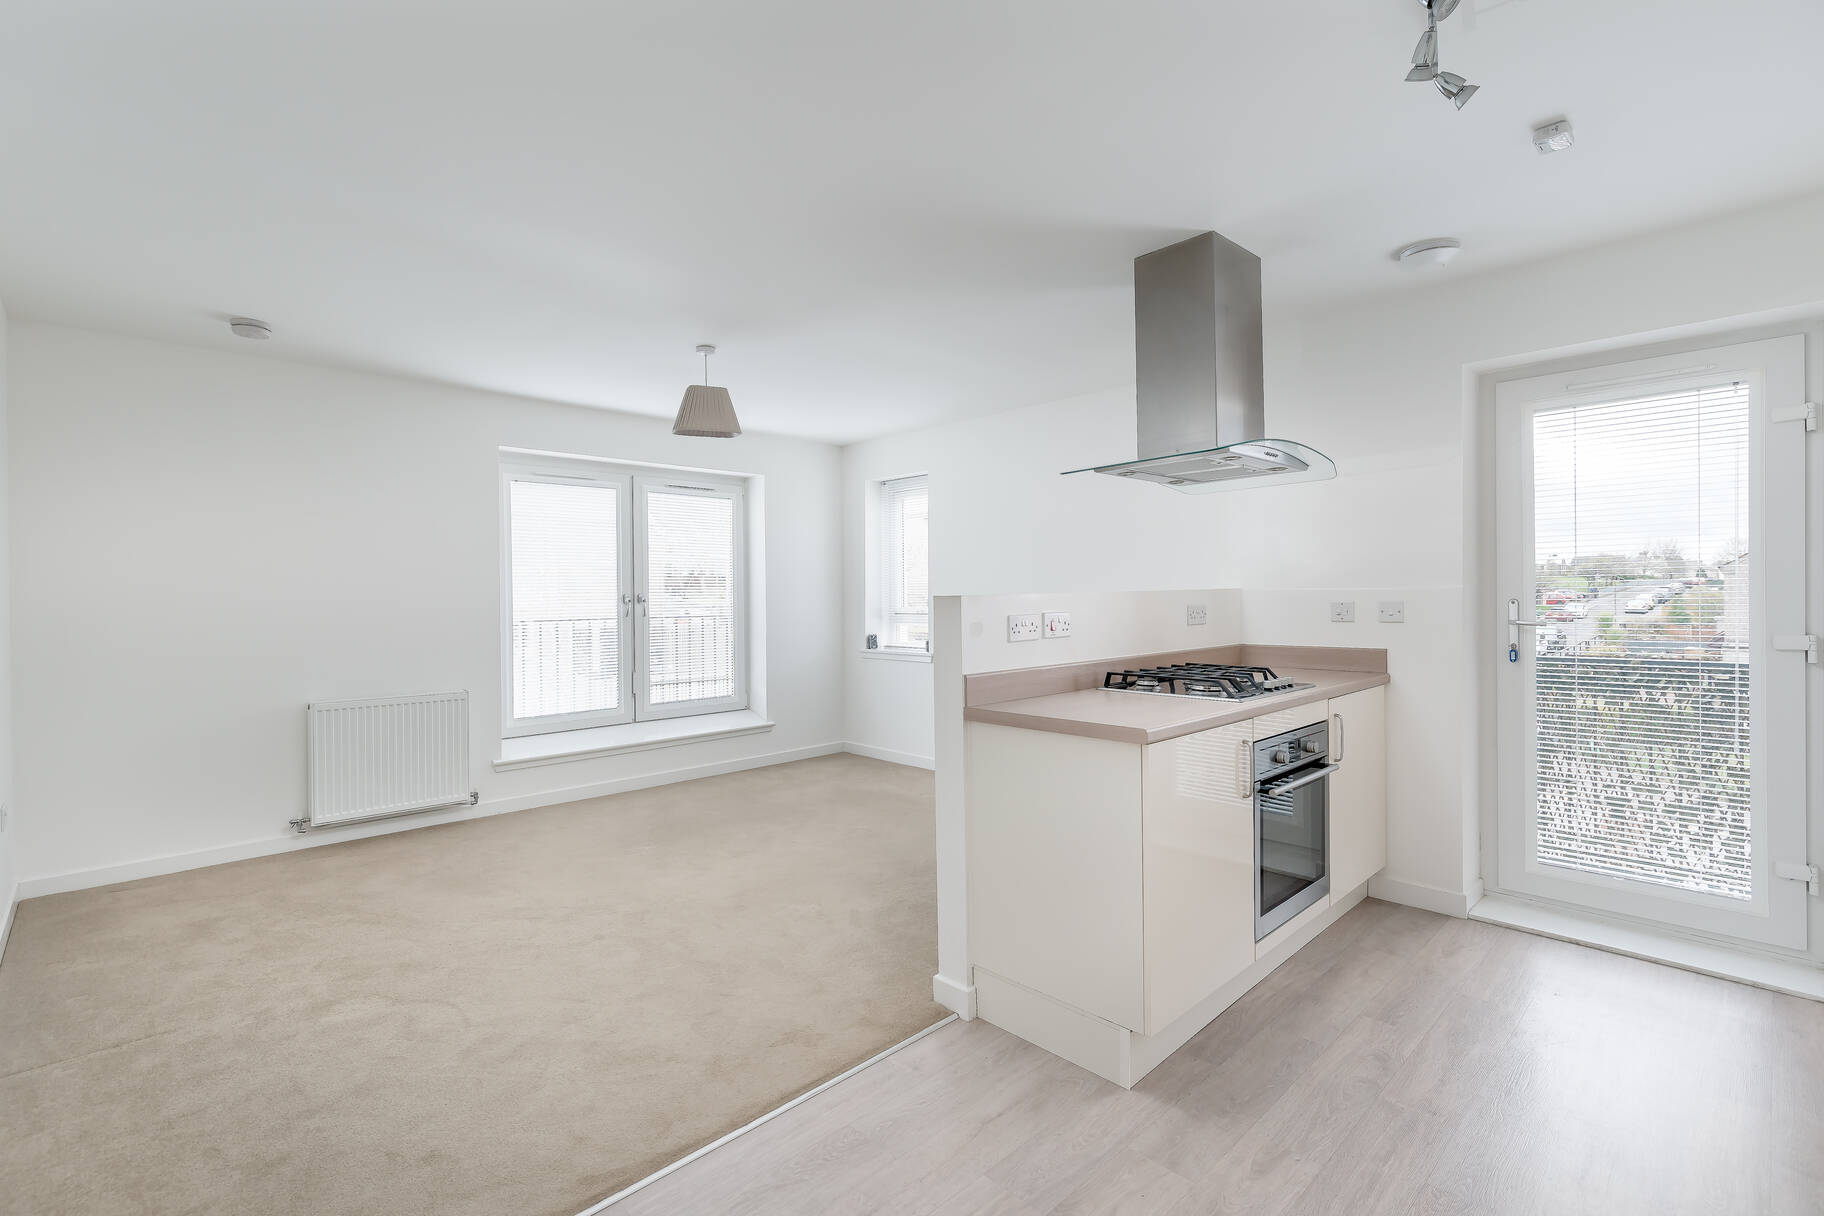 Flat 8, 2, Langwill Place, Currie, EH14 5NL